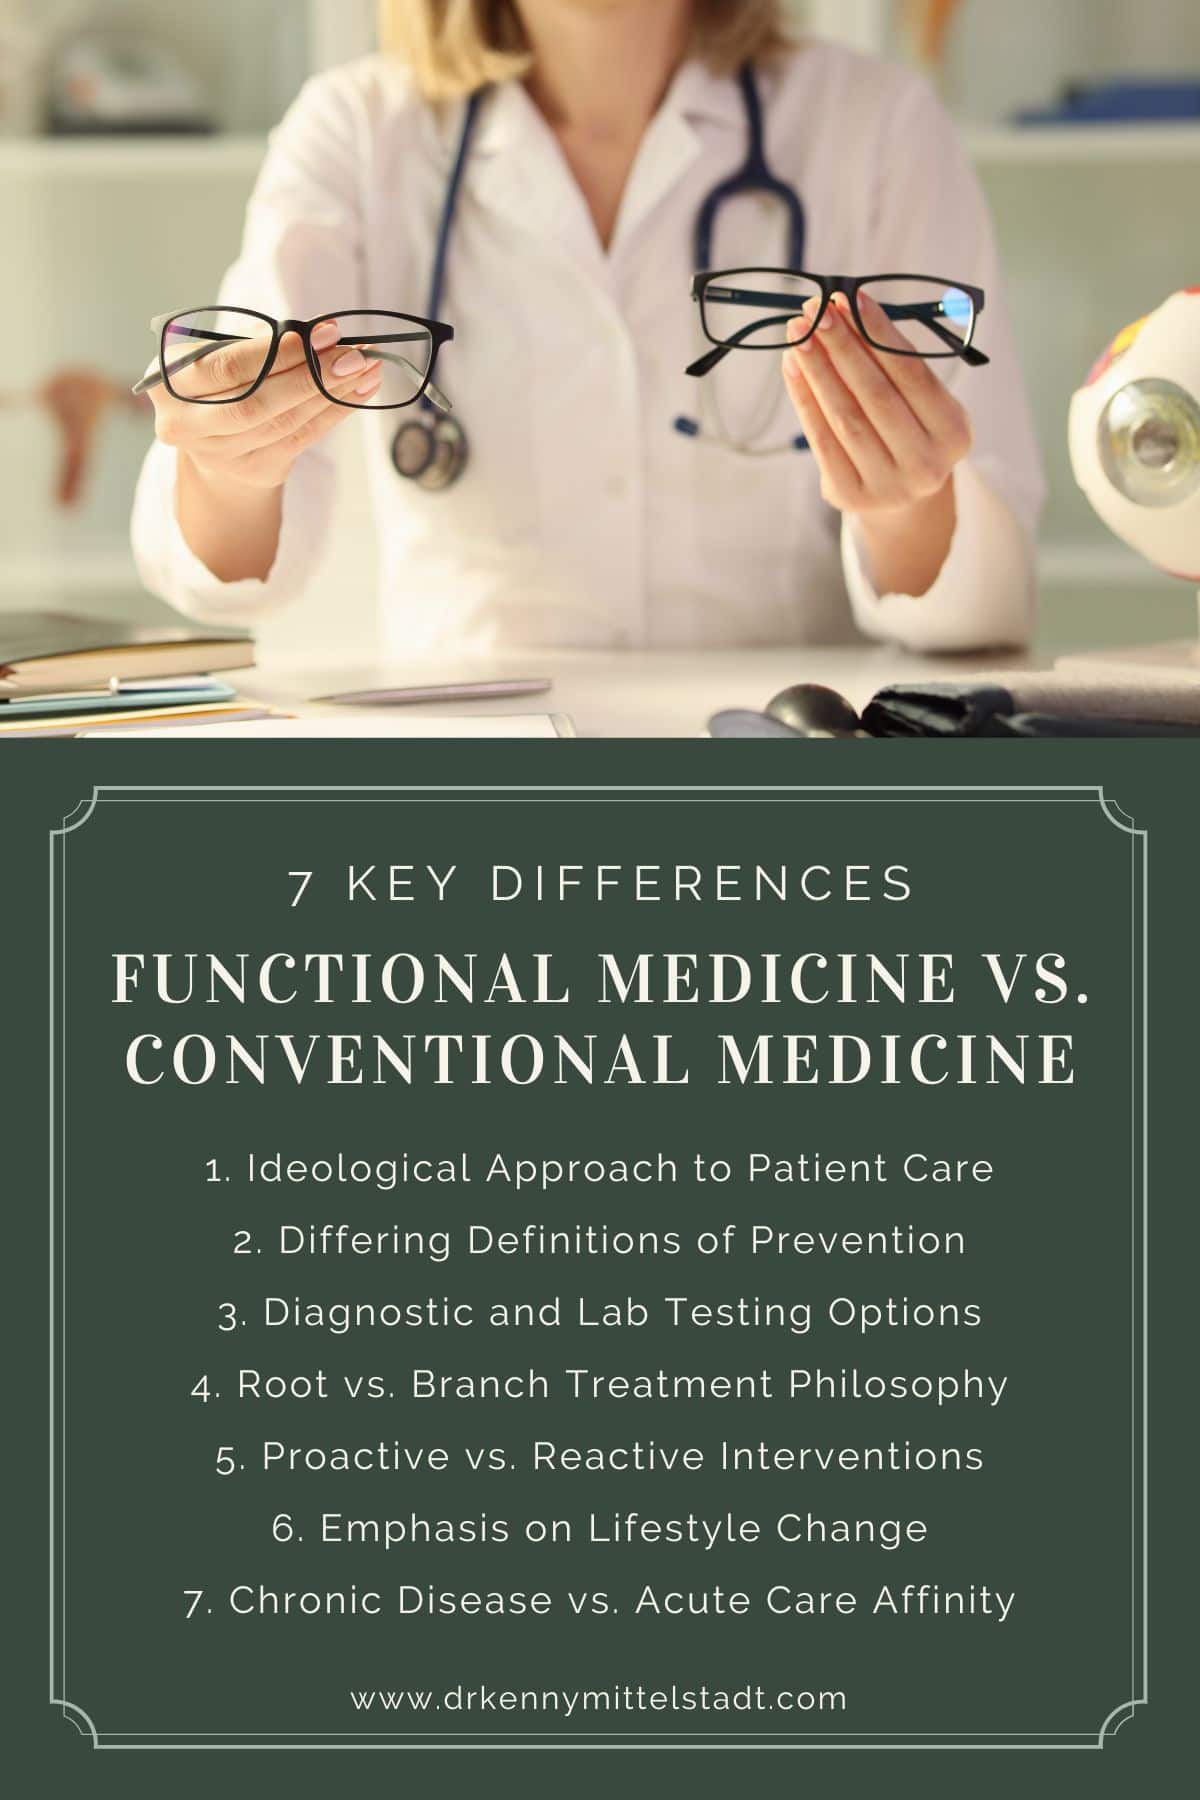 This image depicts a brief summary of 7 key differences when discussing functional medicine vs. conventional medicine. The 7 differences are elaborated on further in the body text and include ideological approaches to patient care, the differing definition of prevention, root versus branch treatment philosophy, and the affinity of each paradigm in chronic disease and acute, emergent conditions.